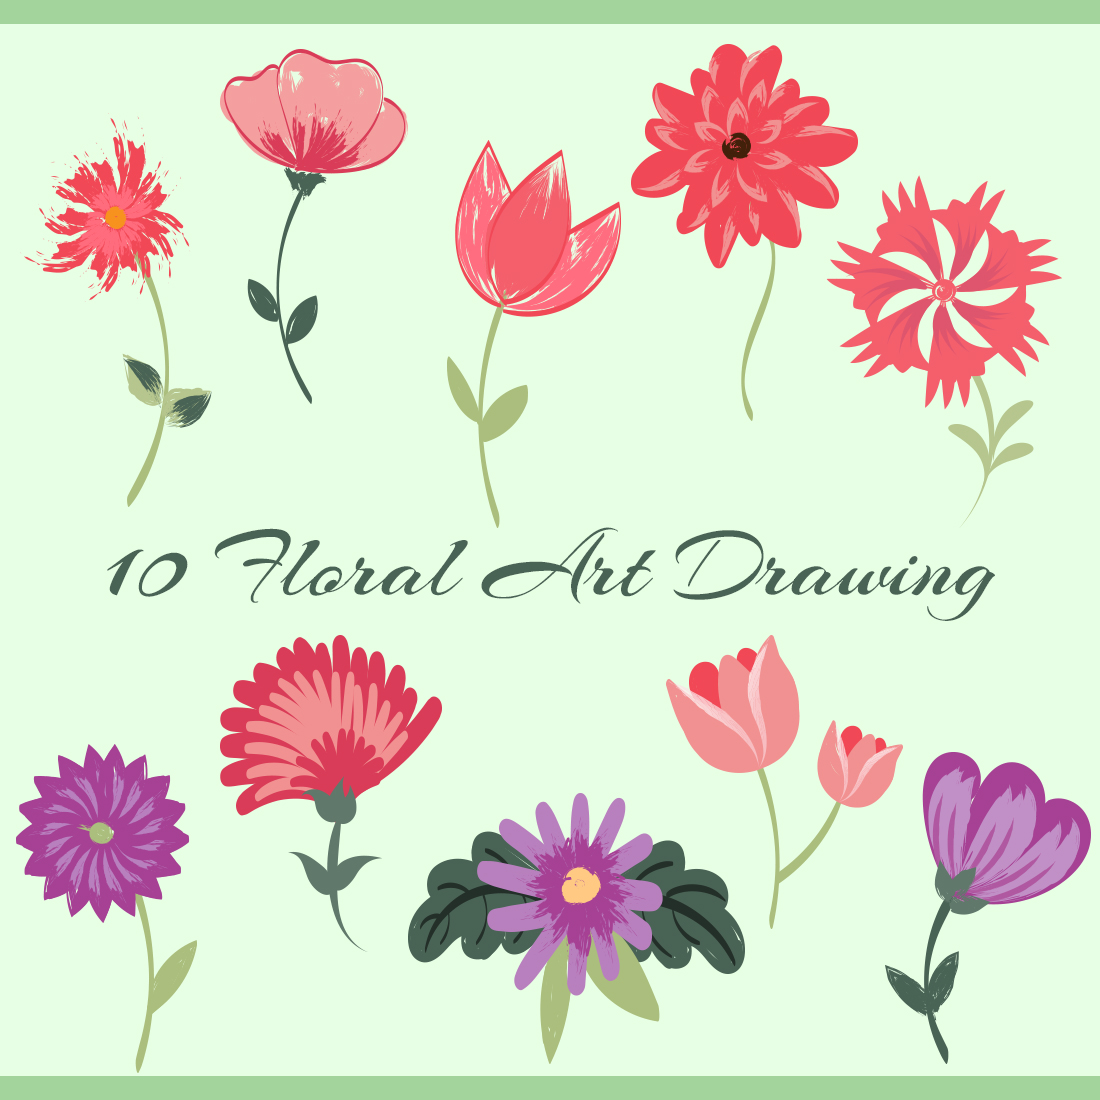 Floral Art Drawing cover images.